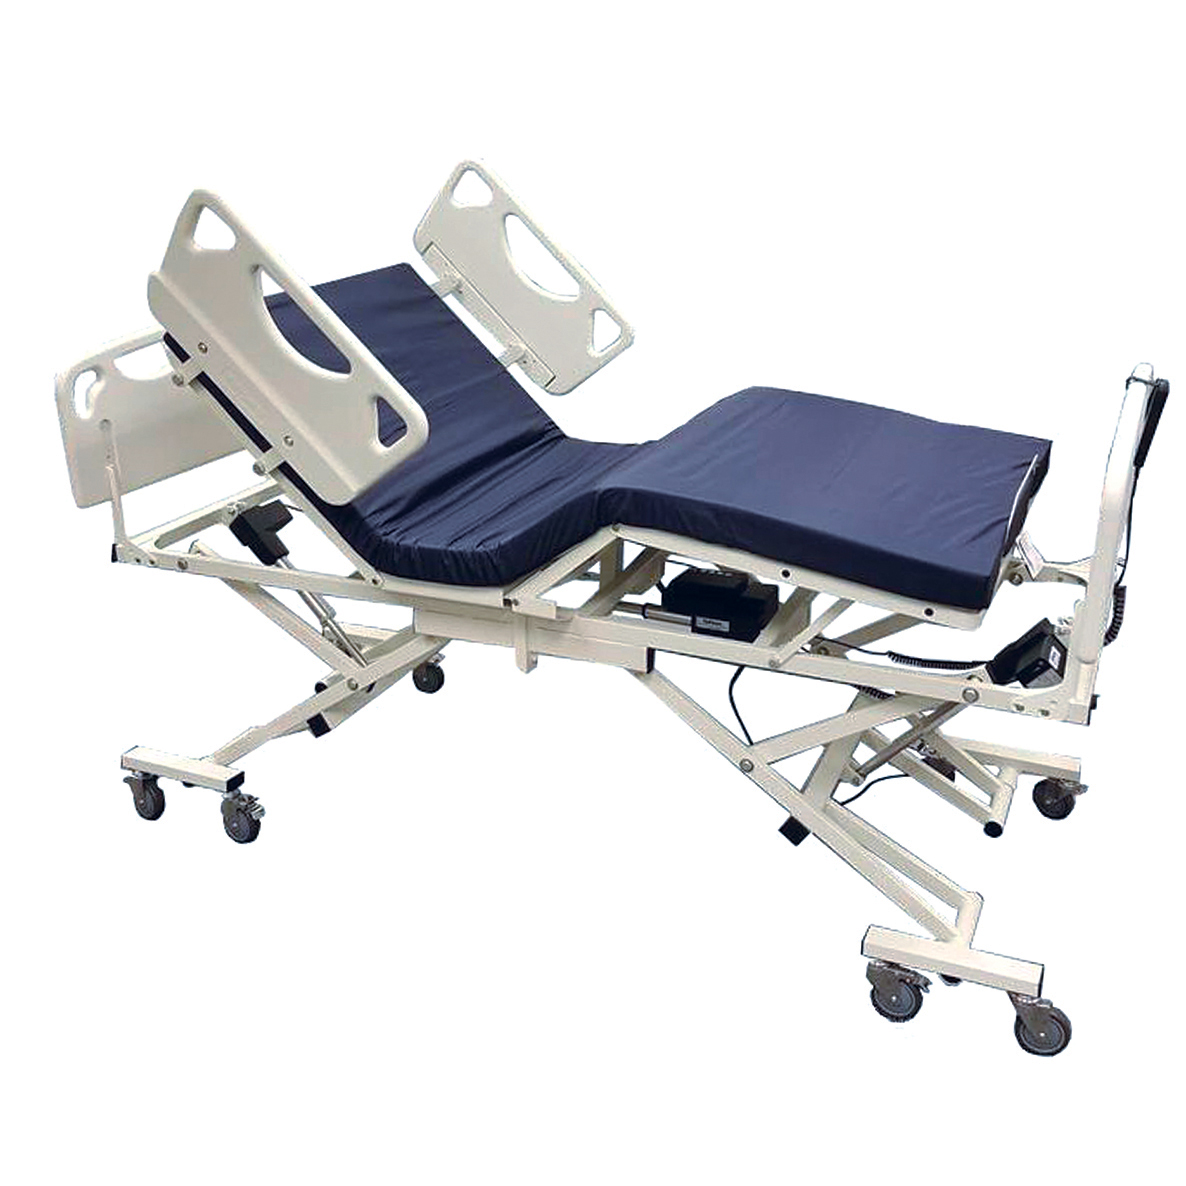 Los Angeles heavy duty extra wide large bariatric adjustable hospital bed